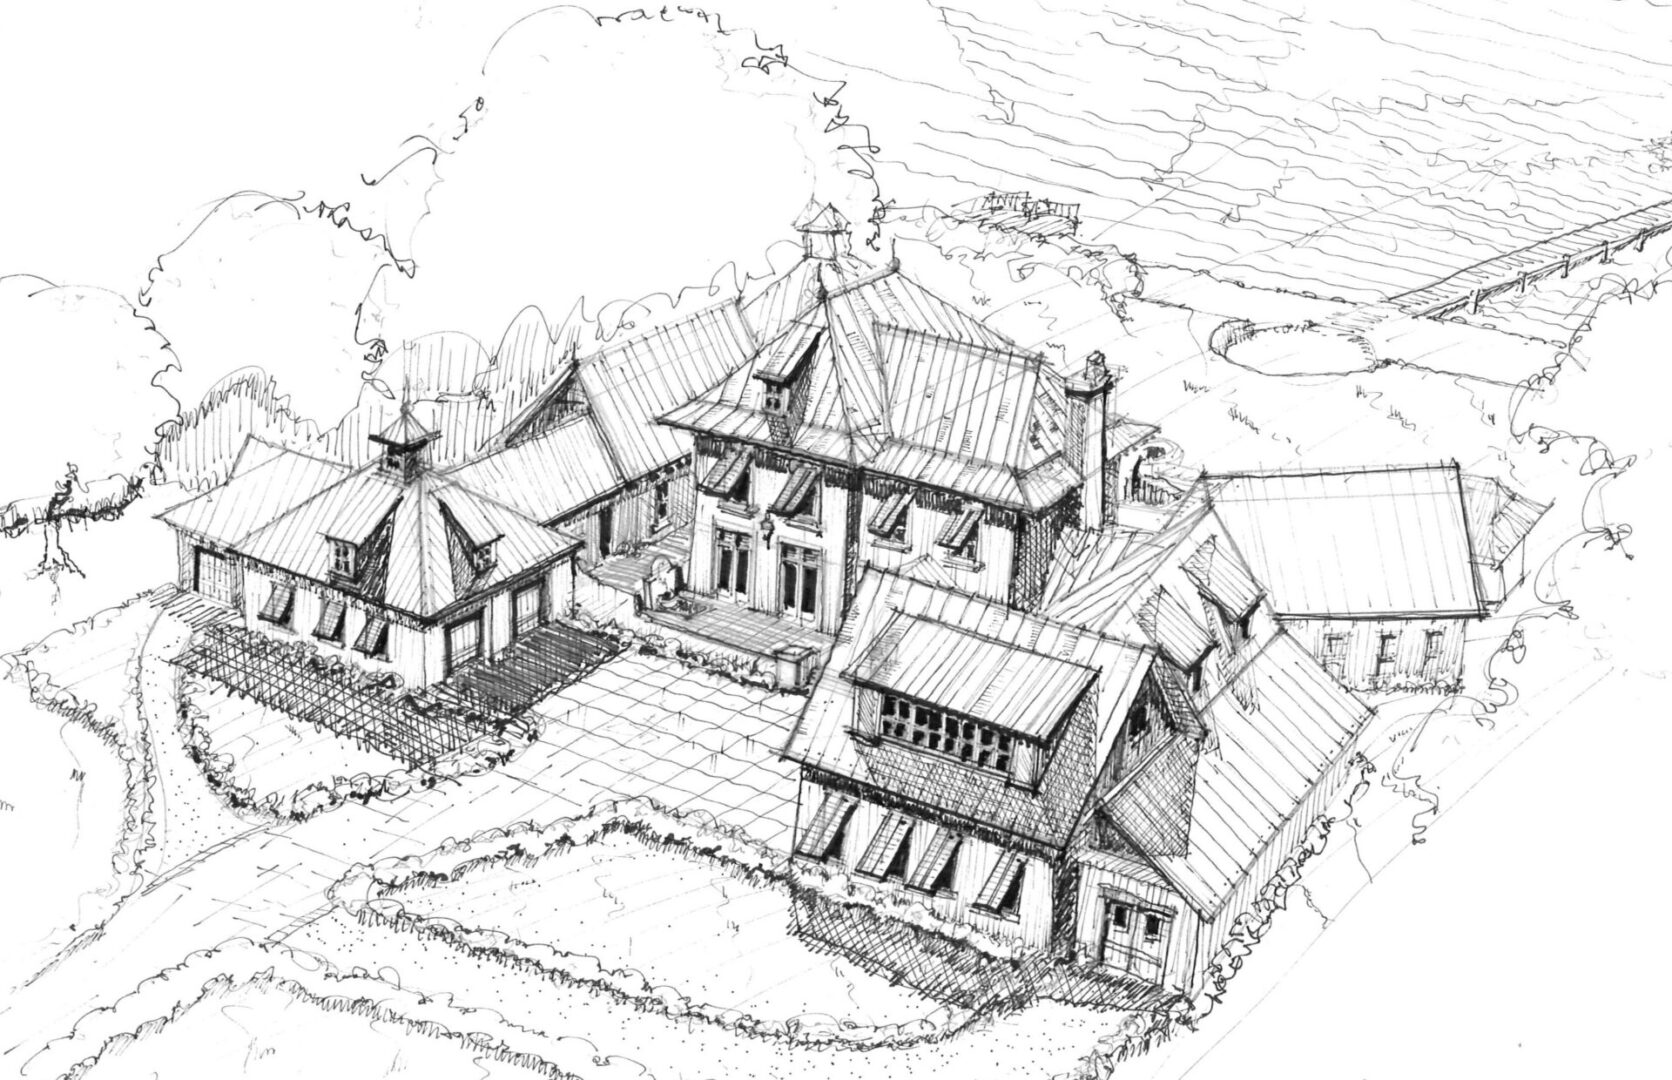 A black and white pencil sketch of the building with lawn